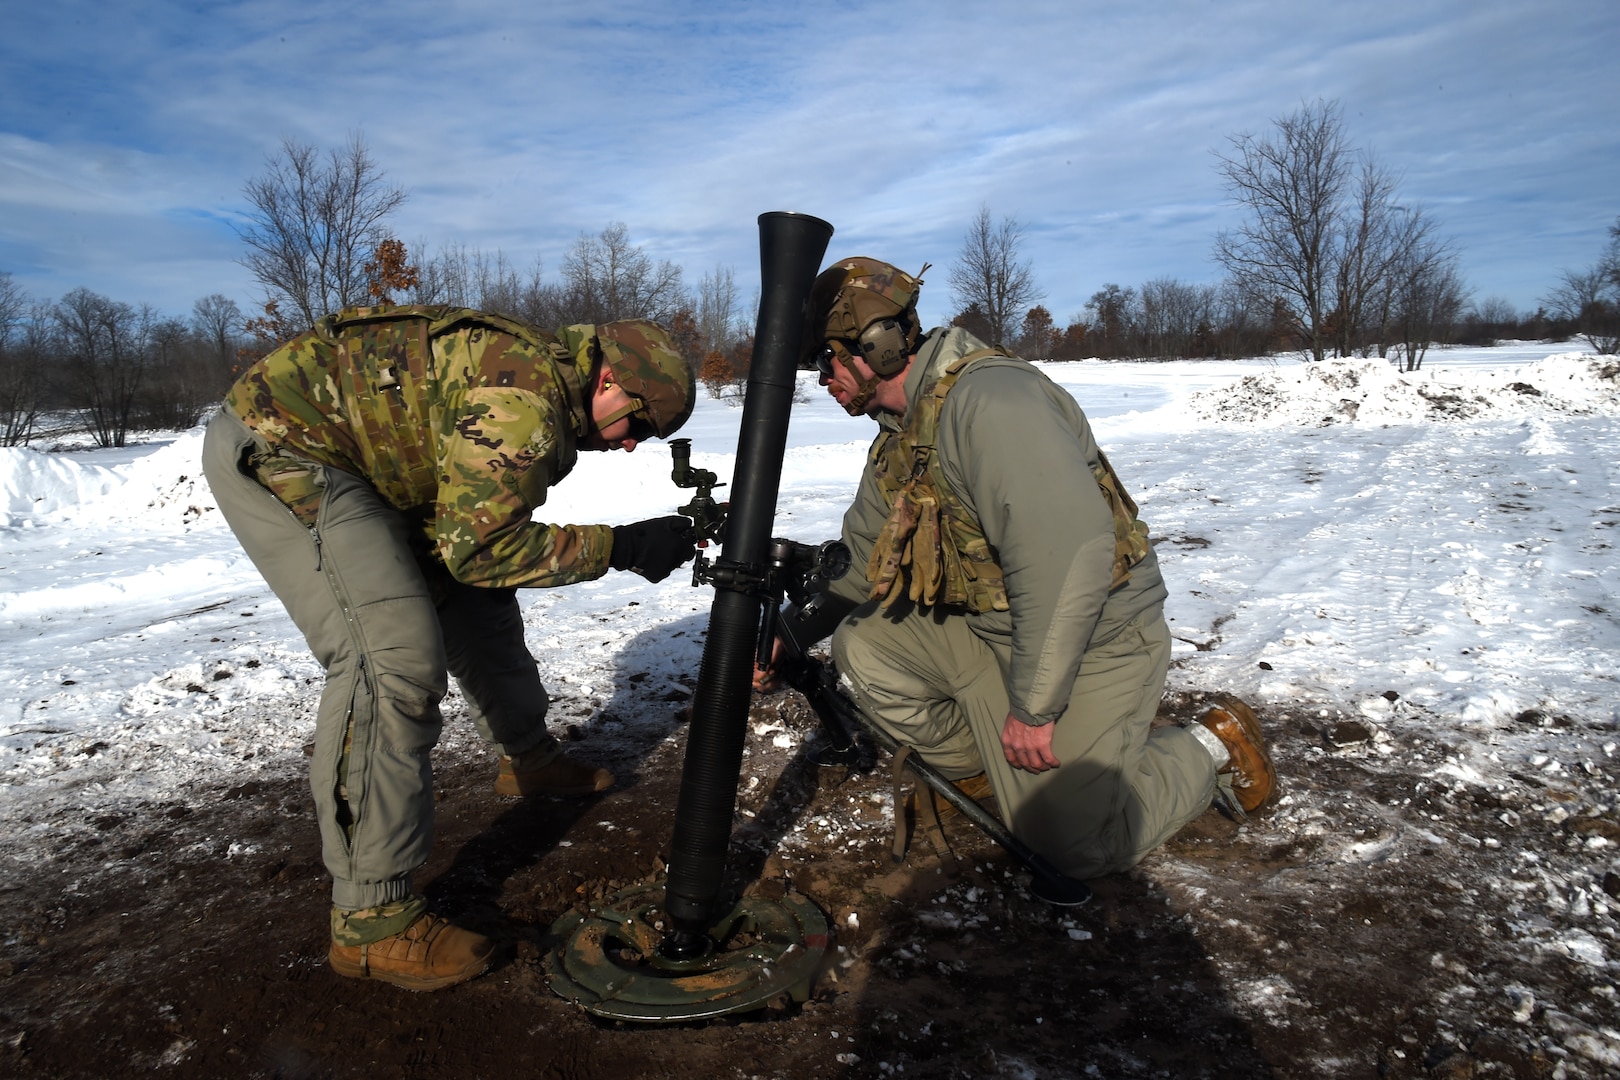 Spc. Emilio Bailey, left, and Spc. Ryan Brust, both indirect fire infantryman with Headquarters and Headquarters Company, 1st Battalion, 125th Infantry Regiment, Michigan Army National Guard, make adjustments to an 81 mm mortar while taking part in exercise Northern Strike 24-1 at Camp Grayling Maneuver Training Center, Michigan, Jan. 21, 2024. Northern Strike 24-1 is the winter warfare component of the annual National Guard Bureau-sponsored Northern Strike exercise series.